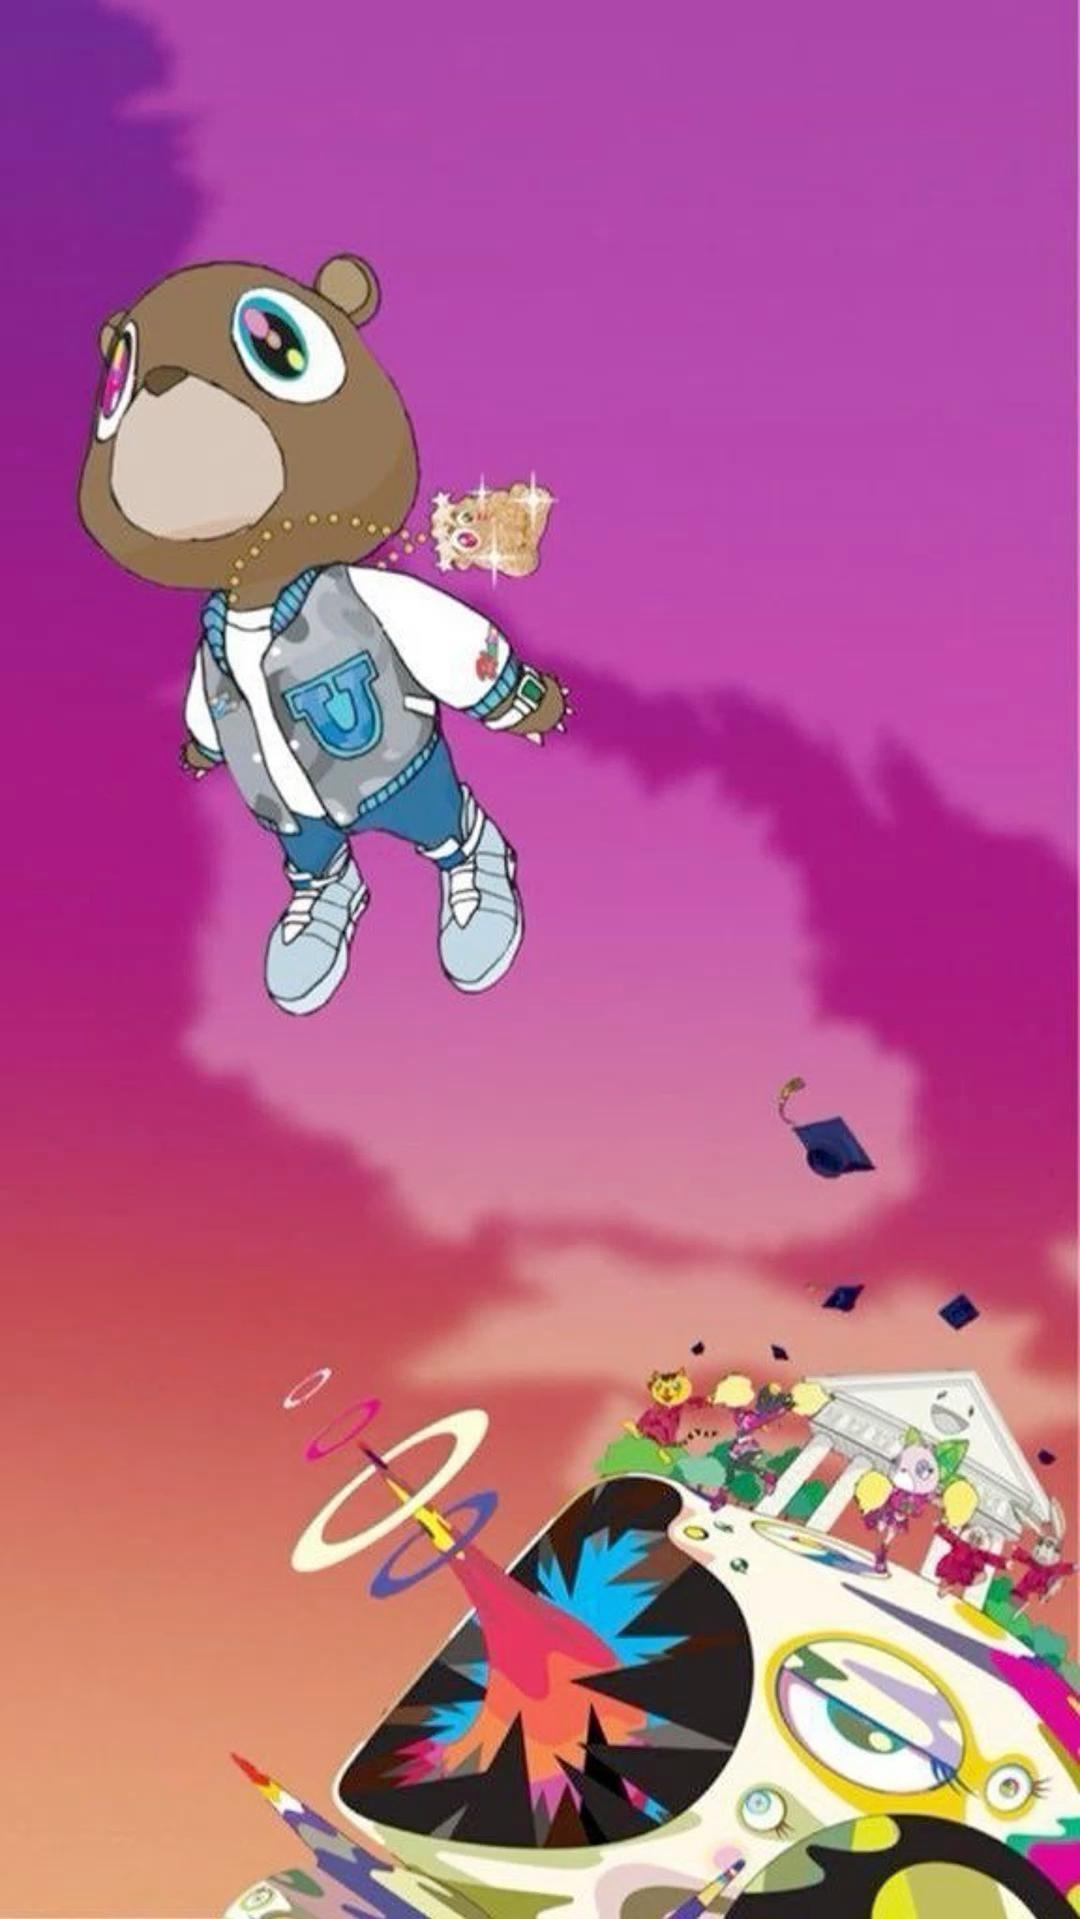 Kanye west album cover in Wallpaper iphone cute Iphone